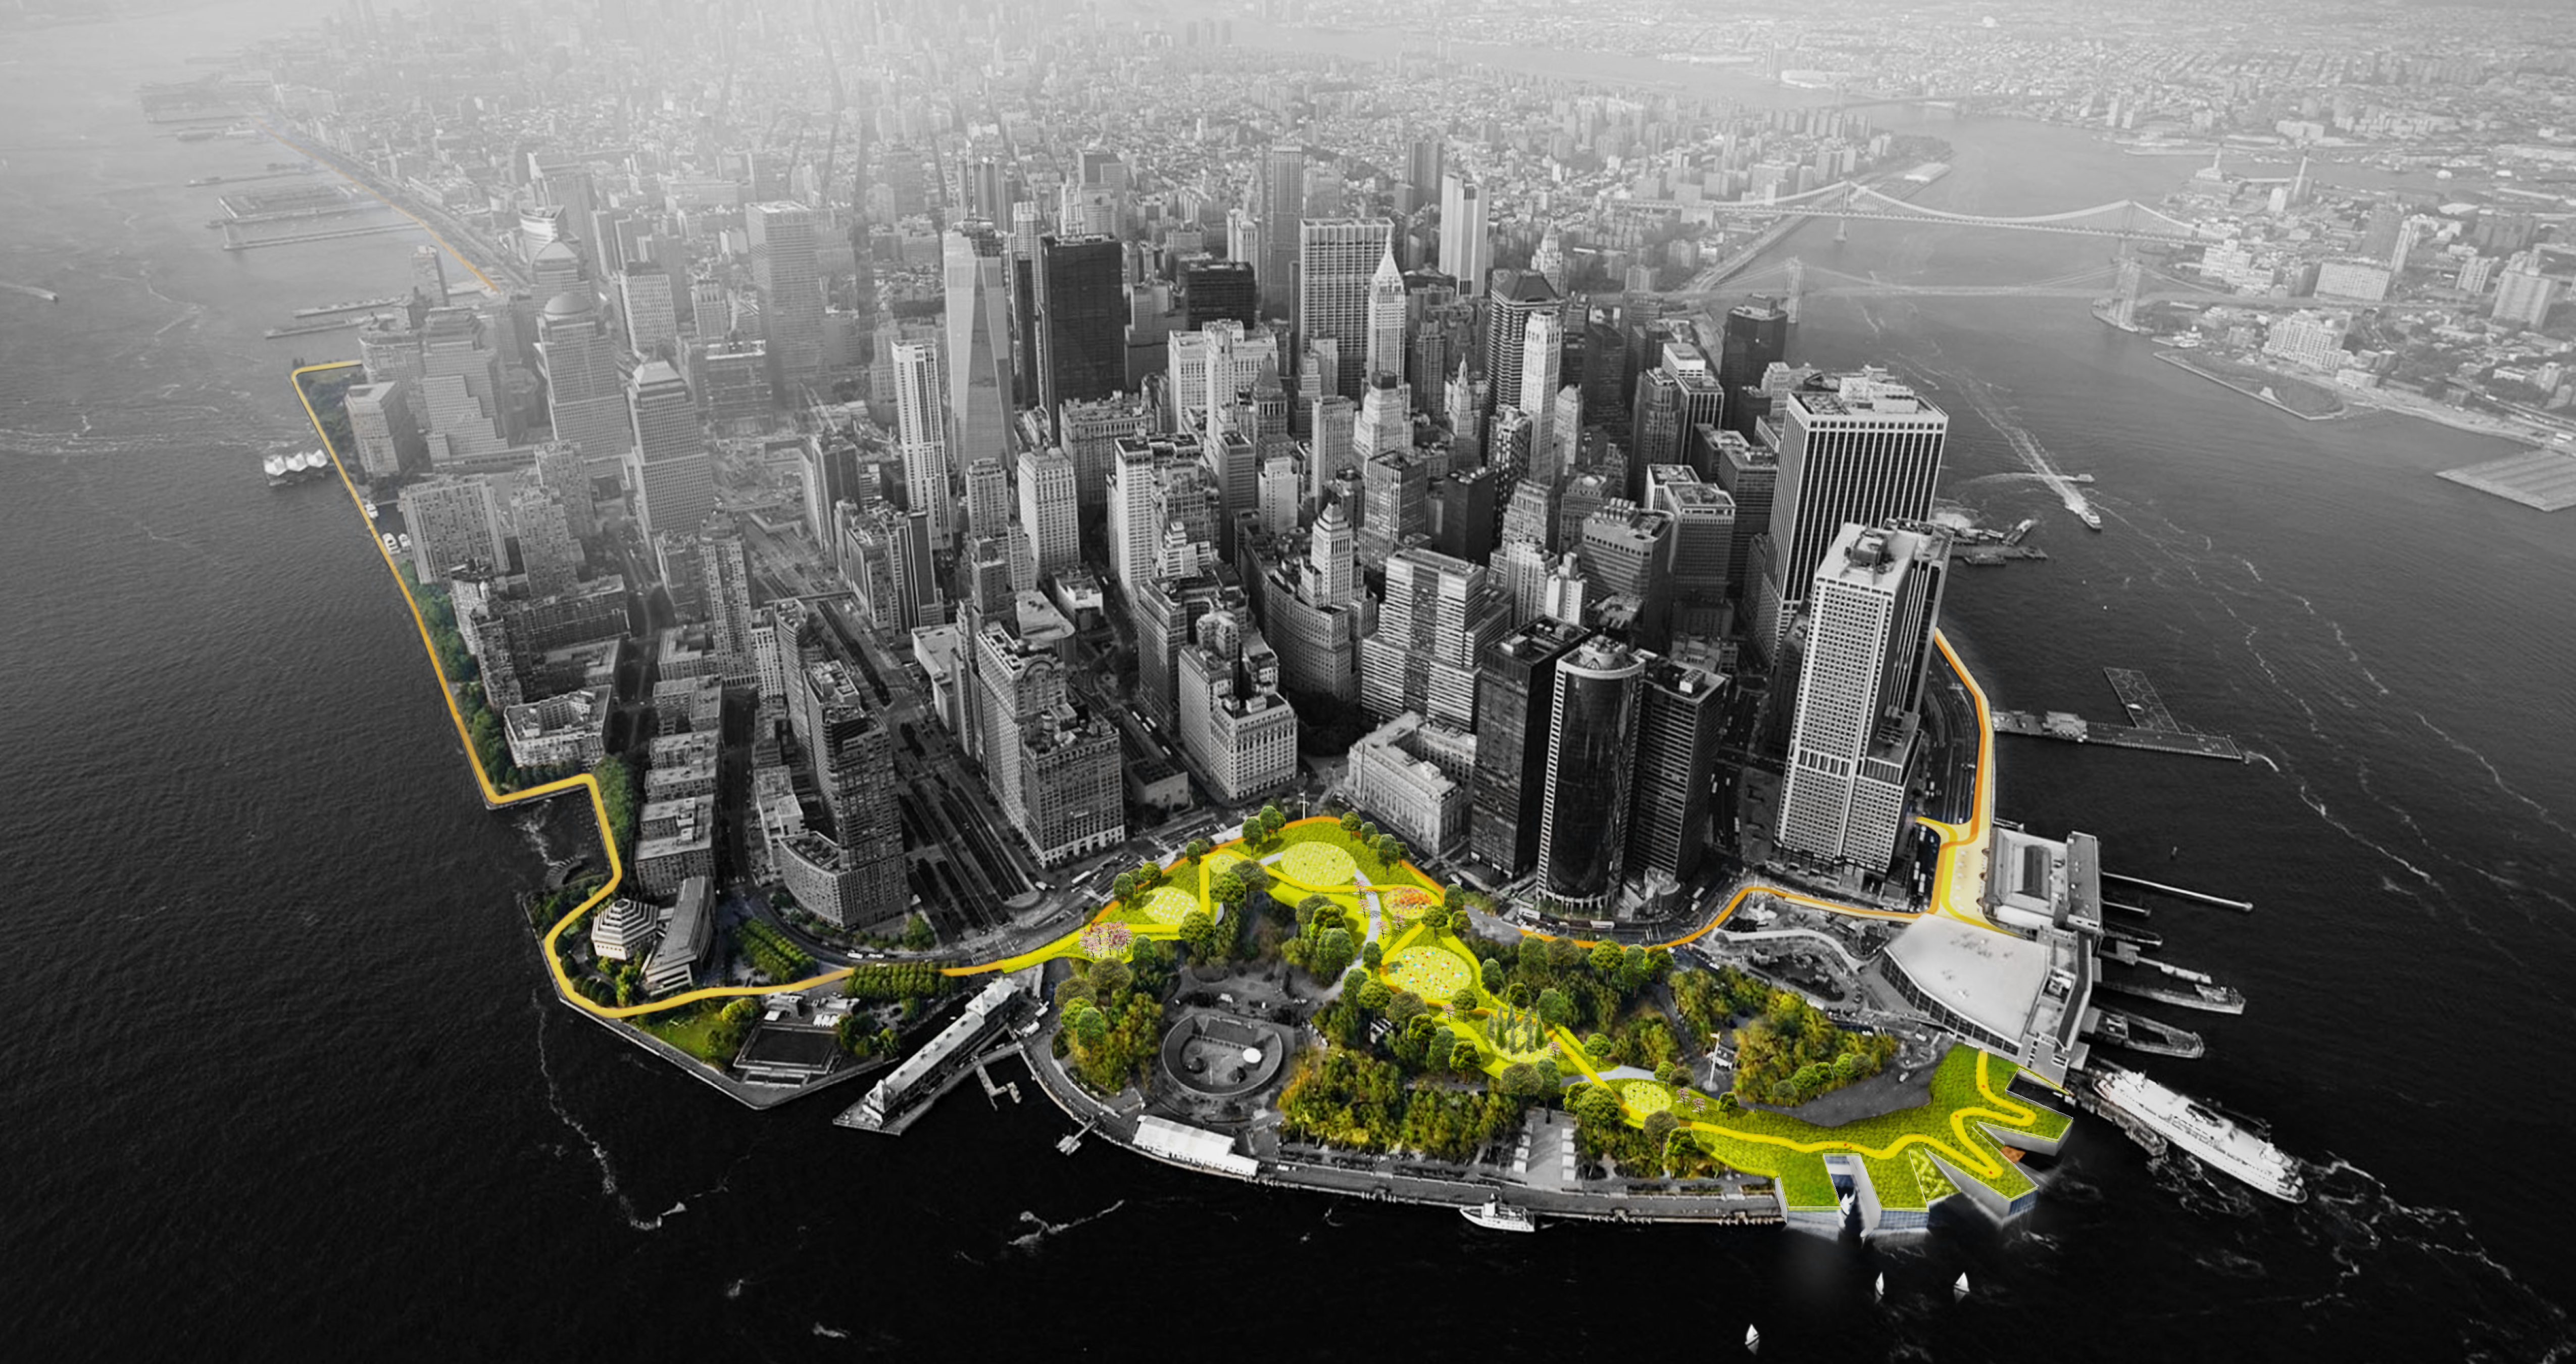 Aerial view of lower Manhattan. Green spaces are colored green and yellow, while the rest of the image is black and white